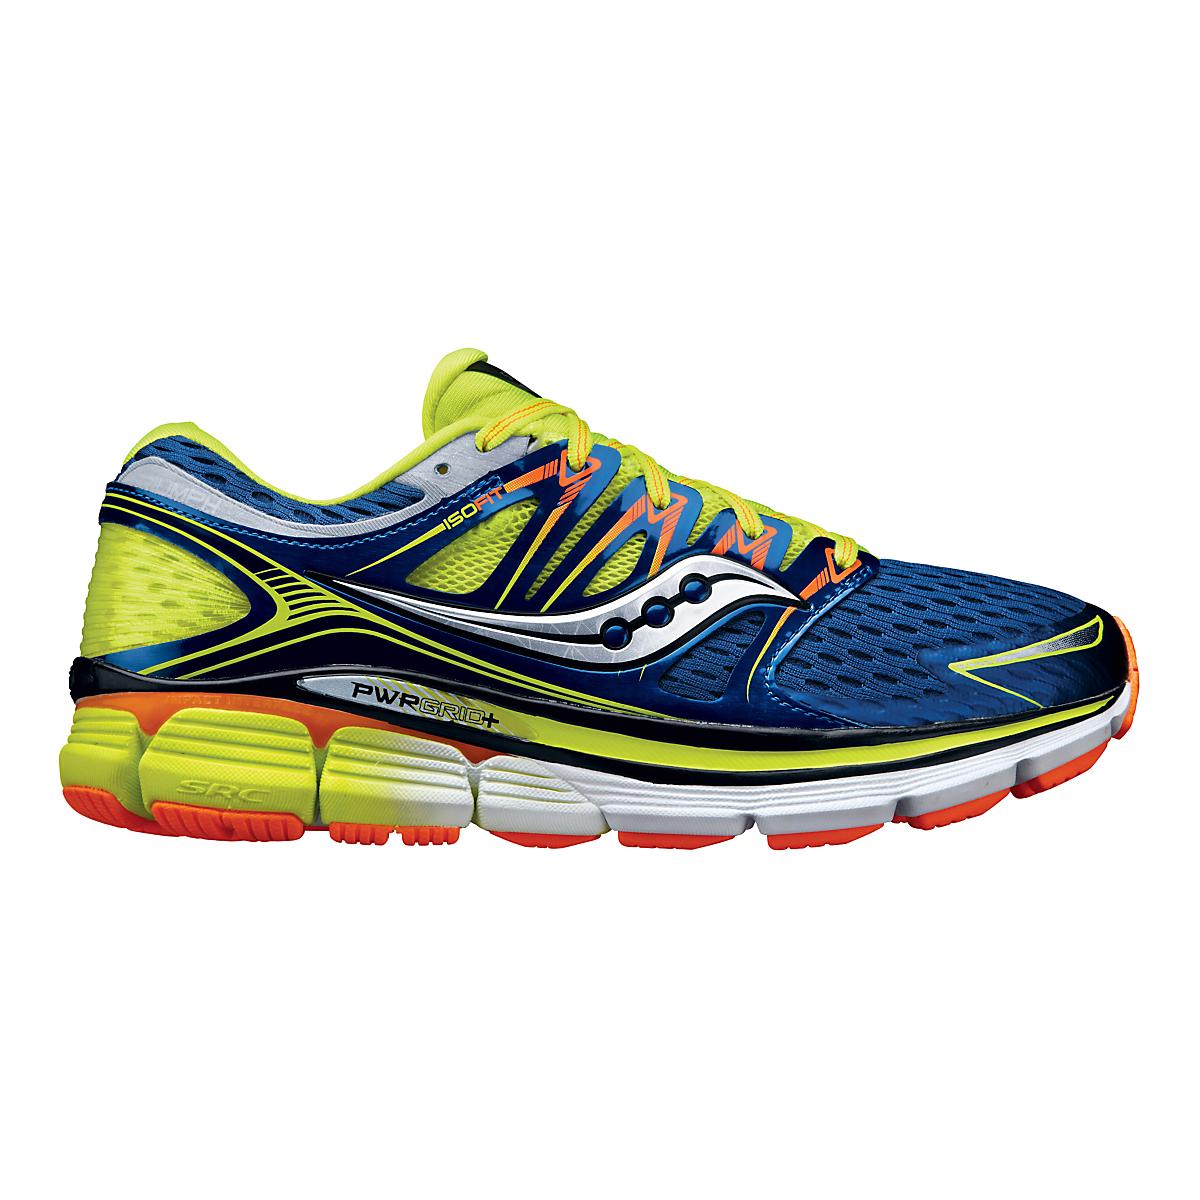 Mens Saucony Triumph ISO Running Shoe at Road Runner Sports